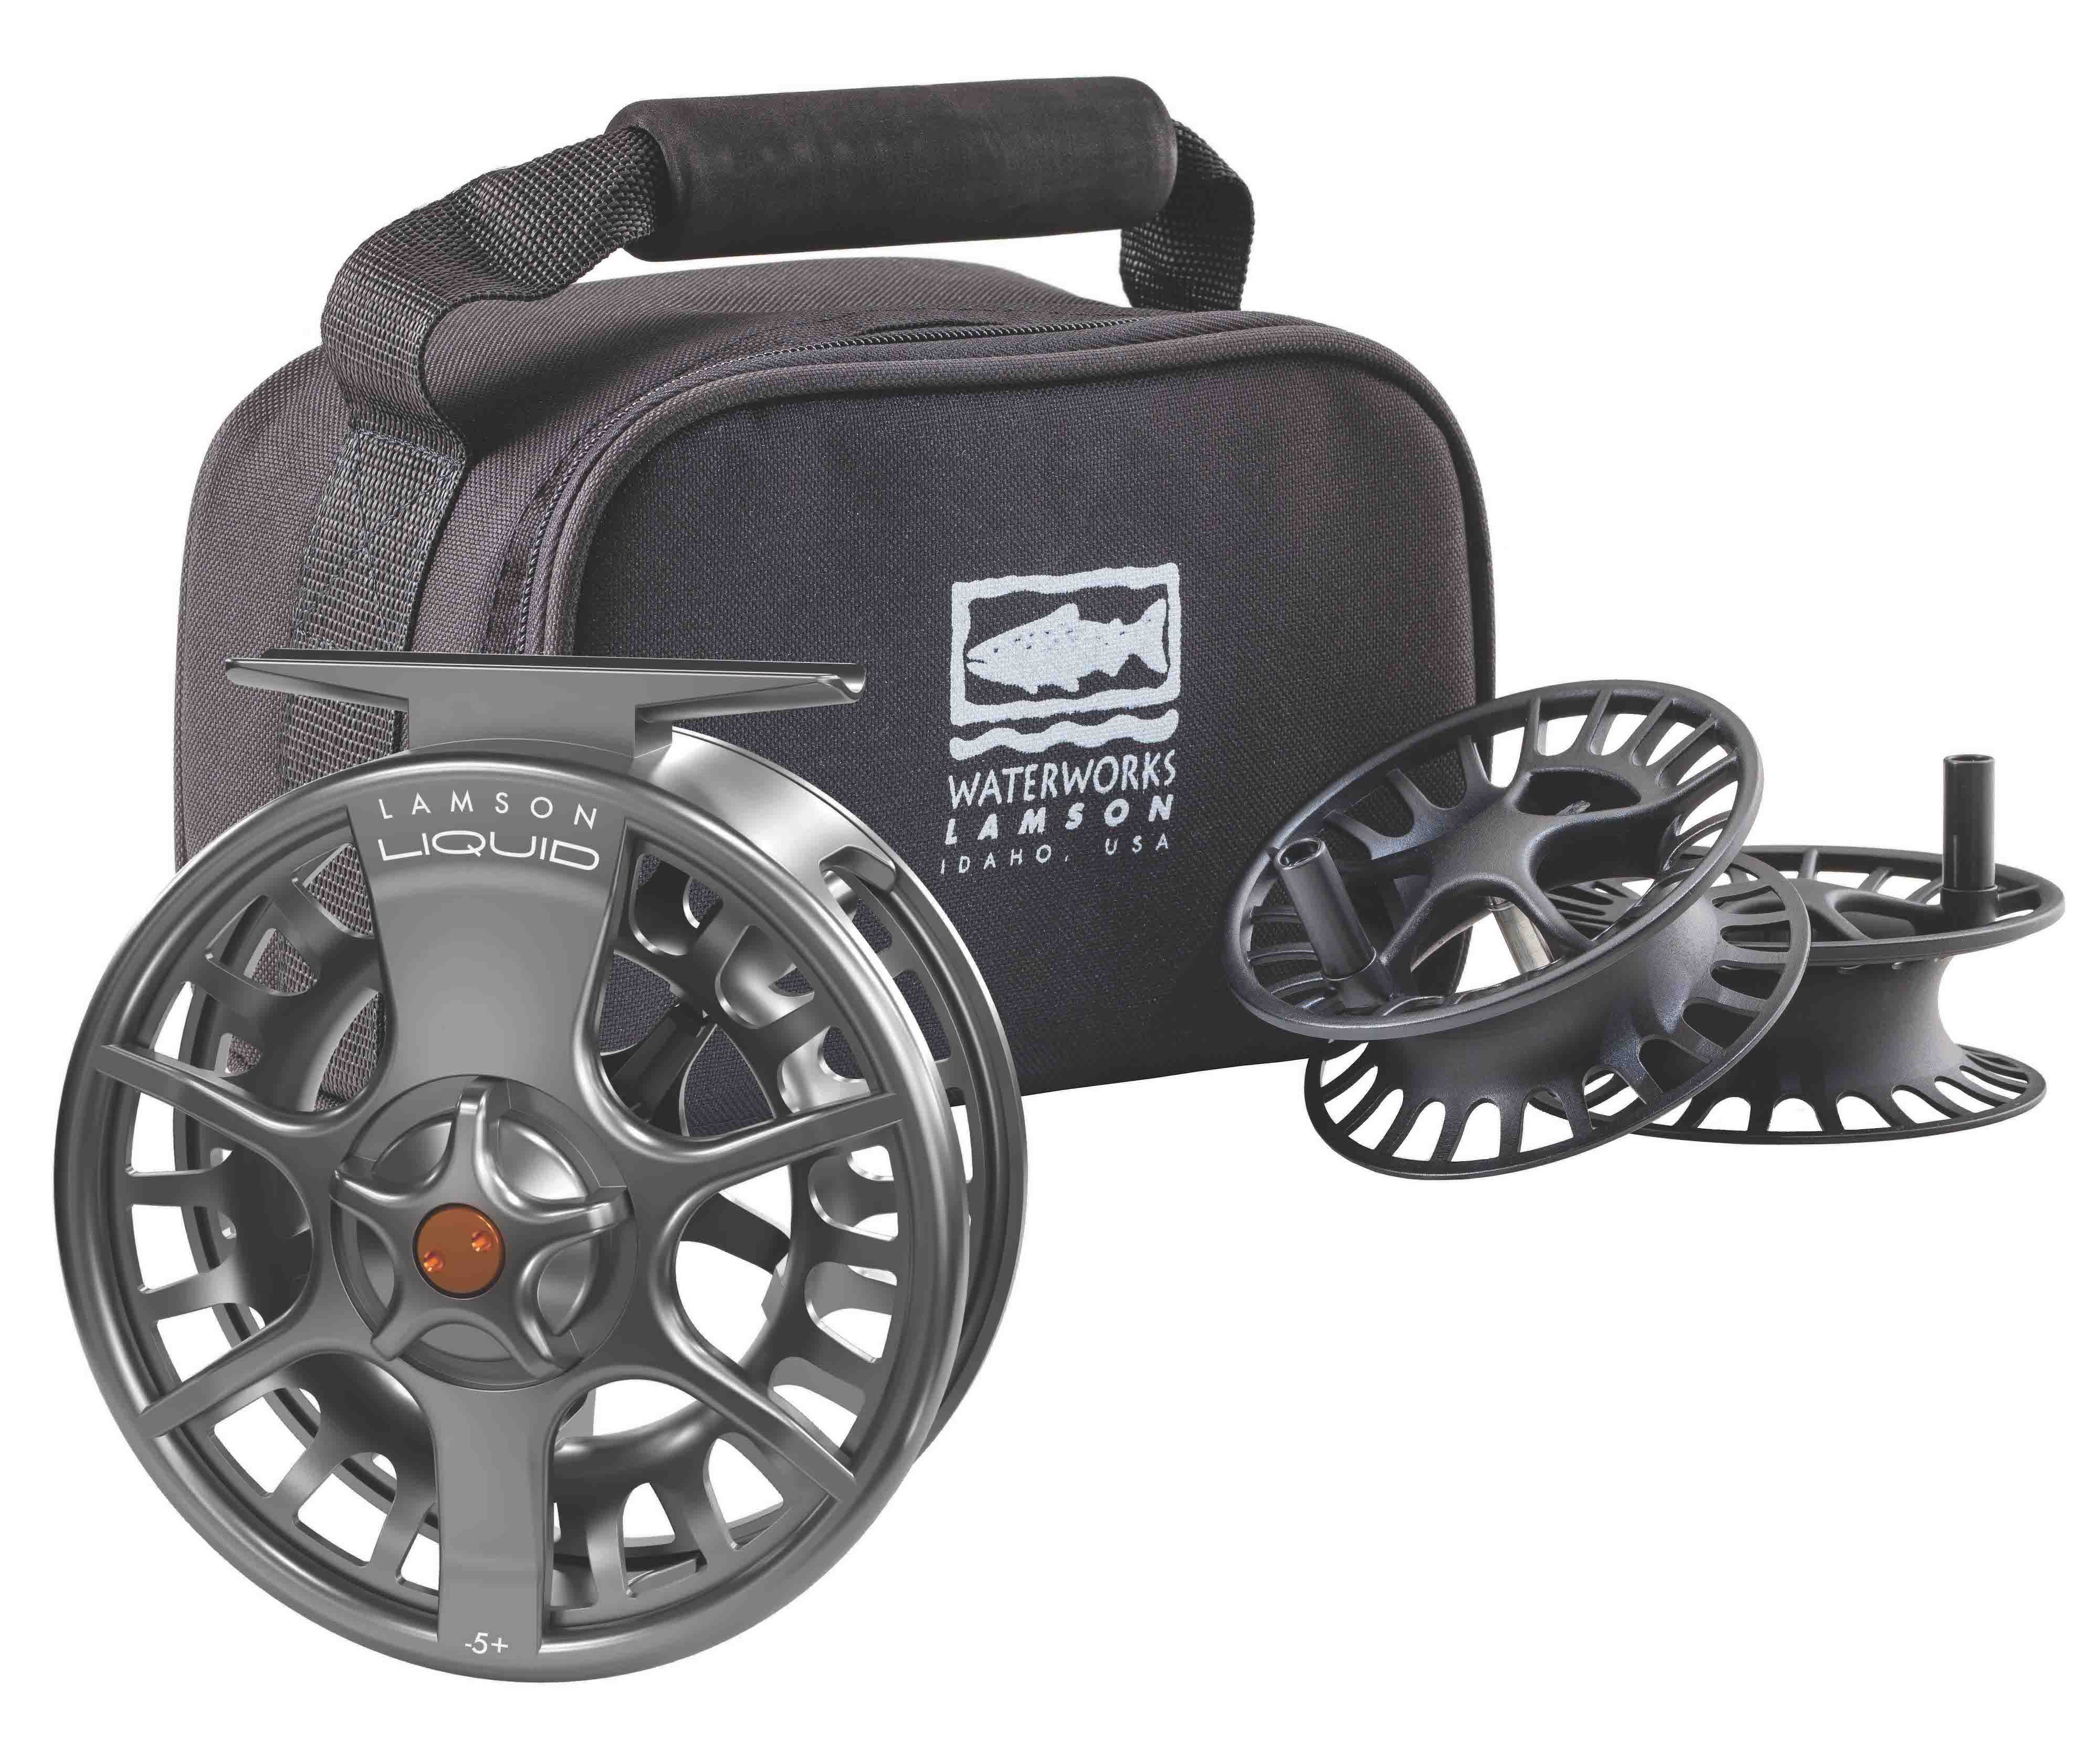 Airflo V3 Large Arbour Fly Reel - Full Cage Model – Glasgow Angling Centre